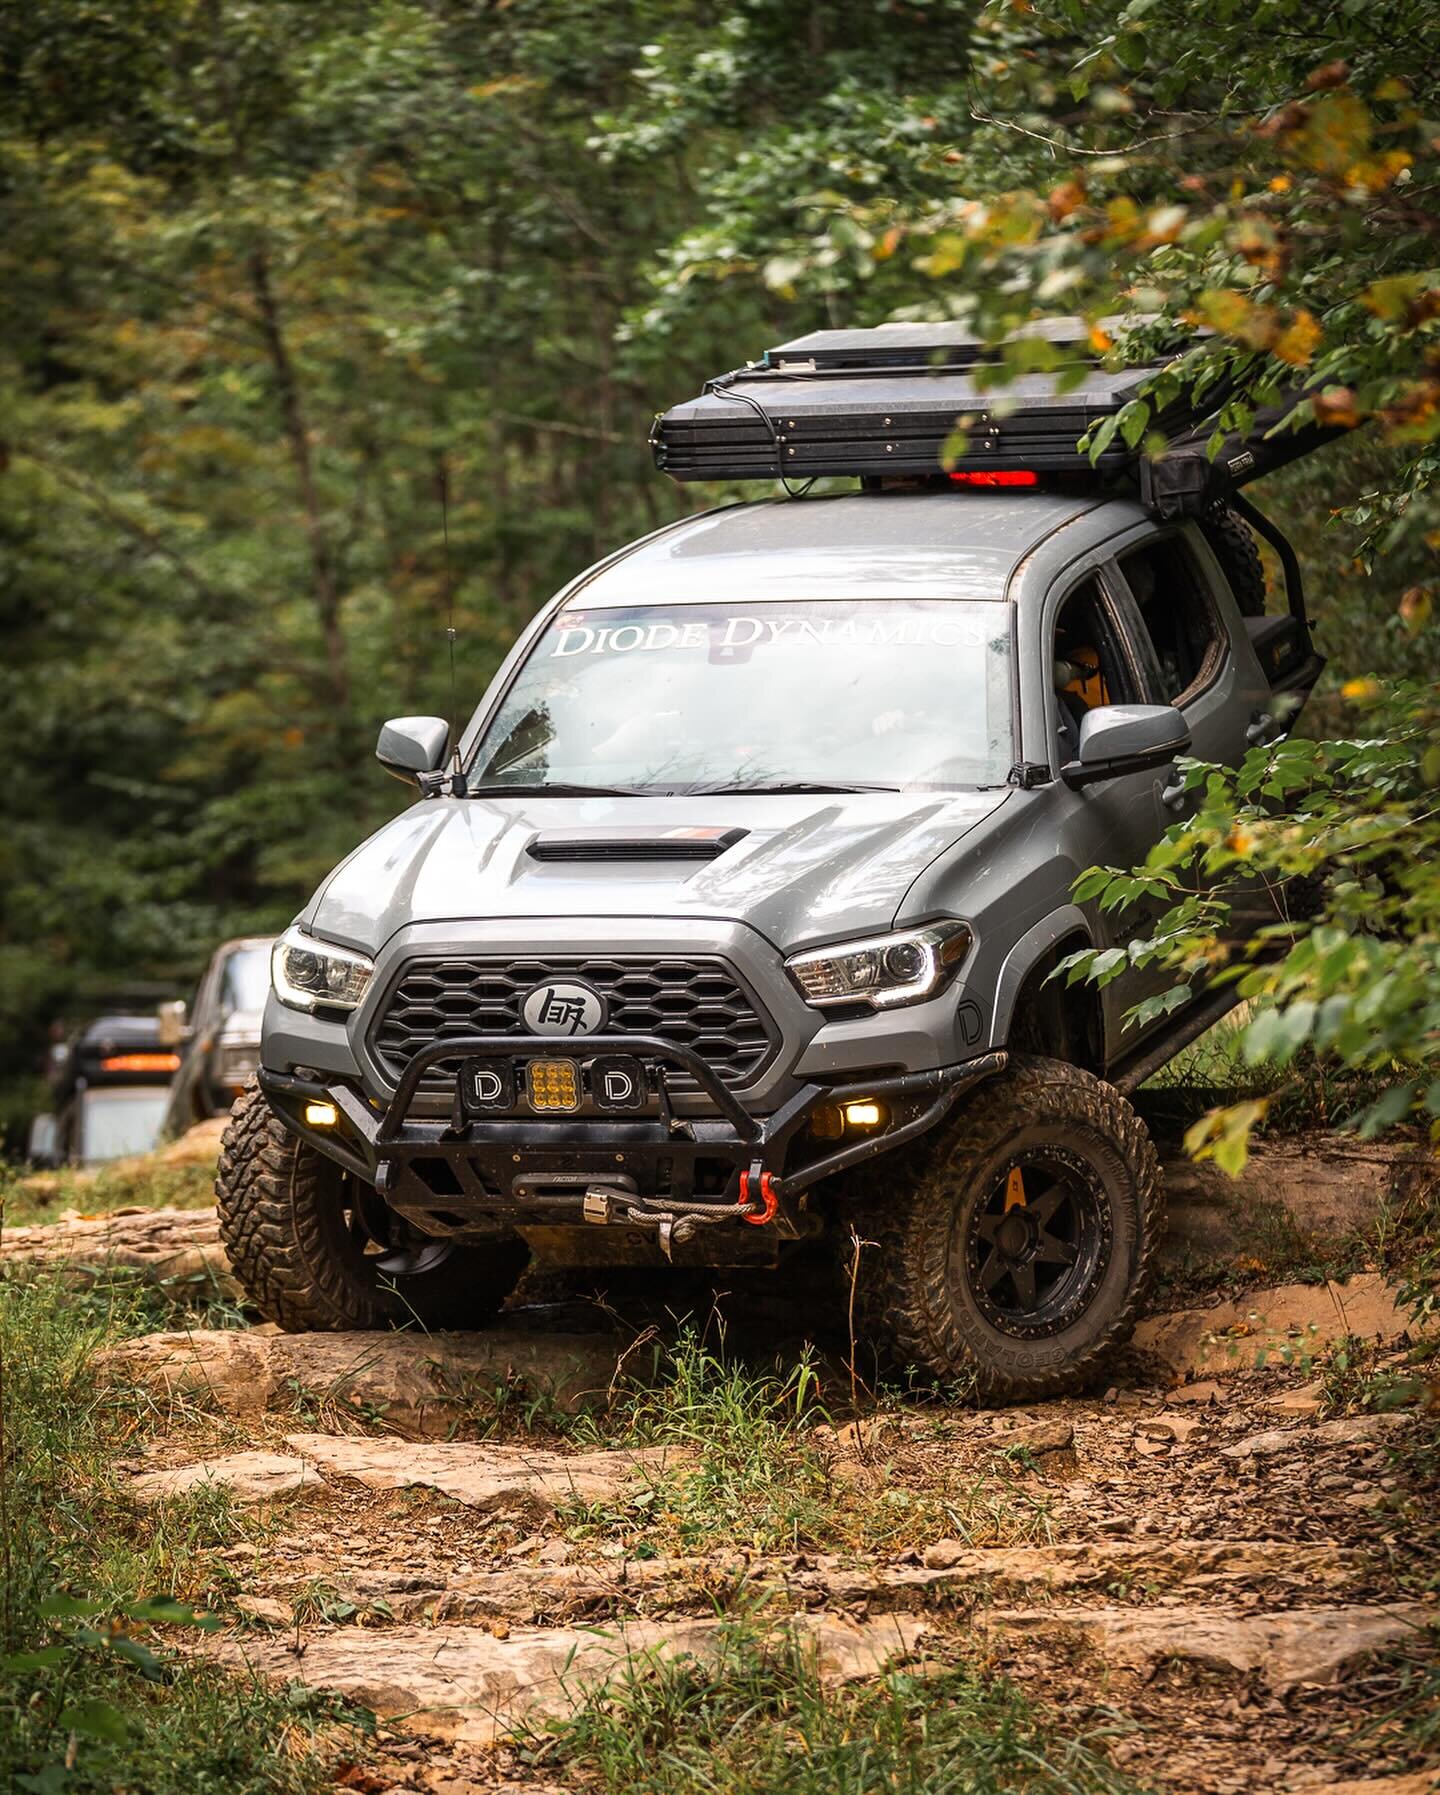 All fax, no printer.

#offroad #overland #toyotagram #toyotatacoma #onyokohamas #diodepartner #rooftoptent #kentucky #danielboonenationalforest #teamstealth